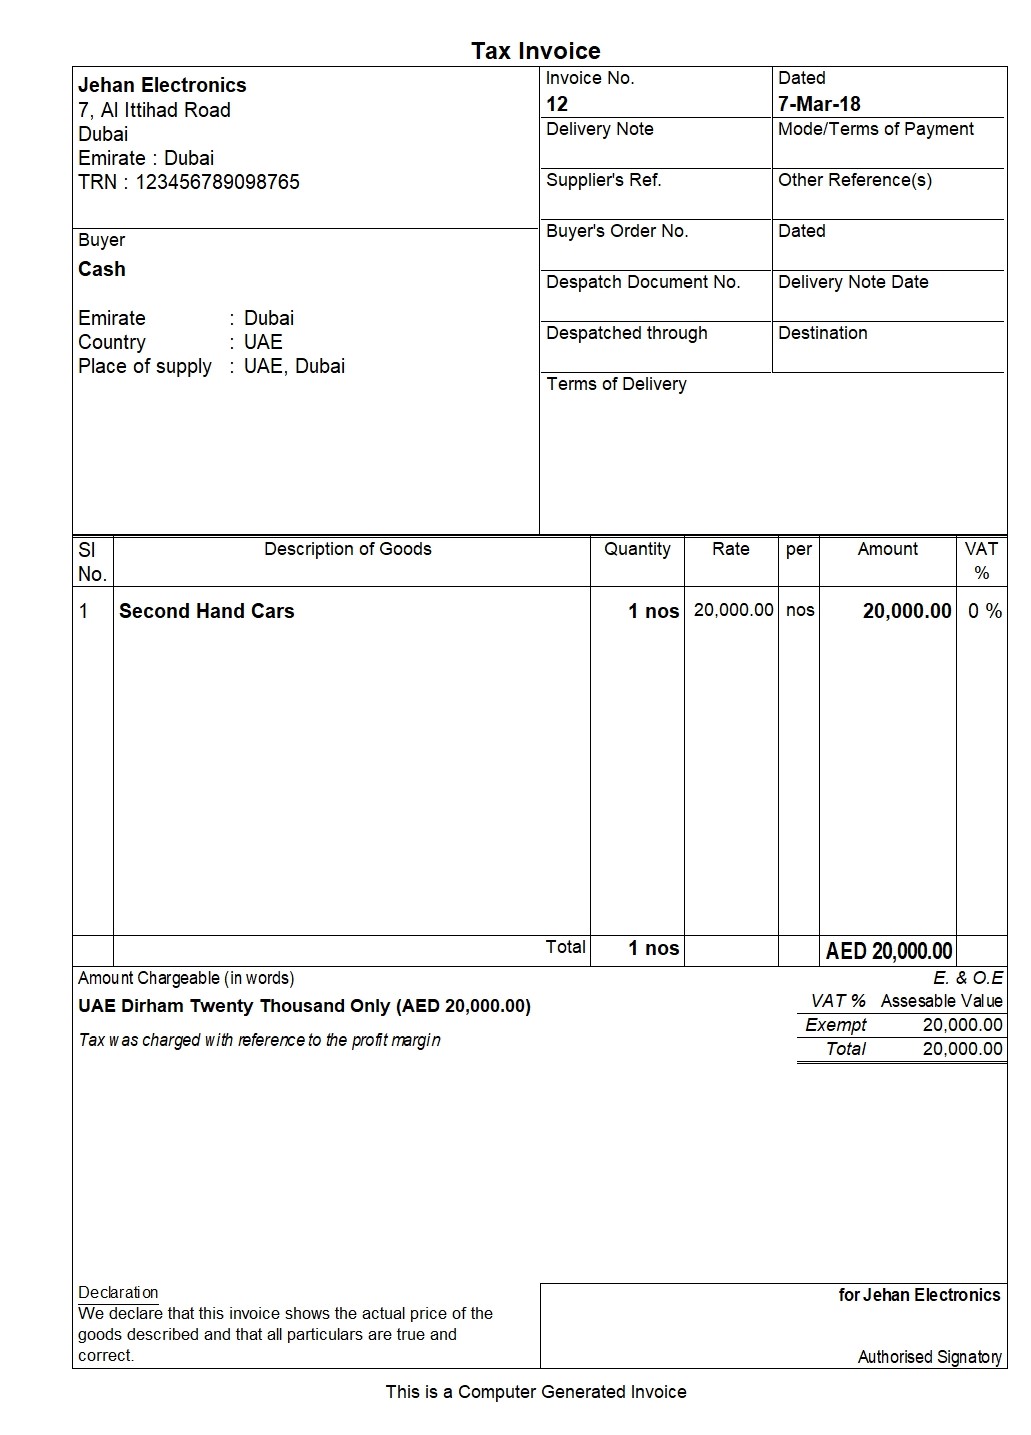 simplified-tax-invoice-under-vat-tax-invoice-format